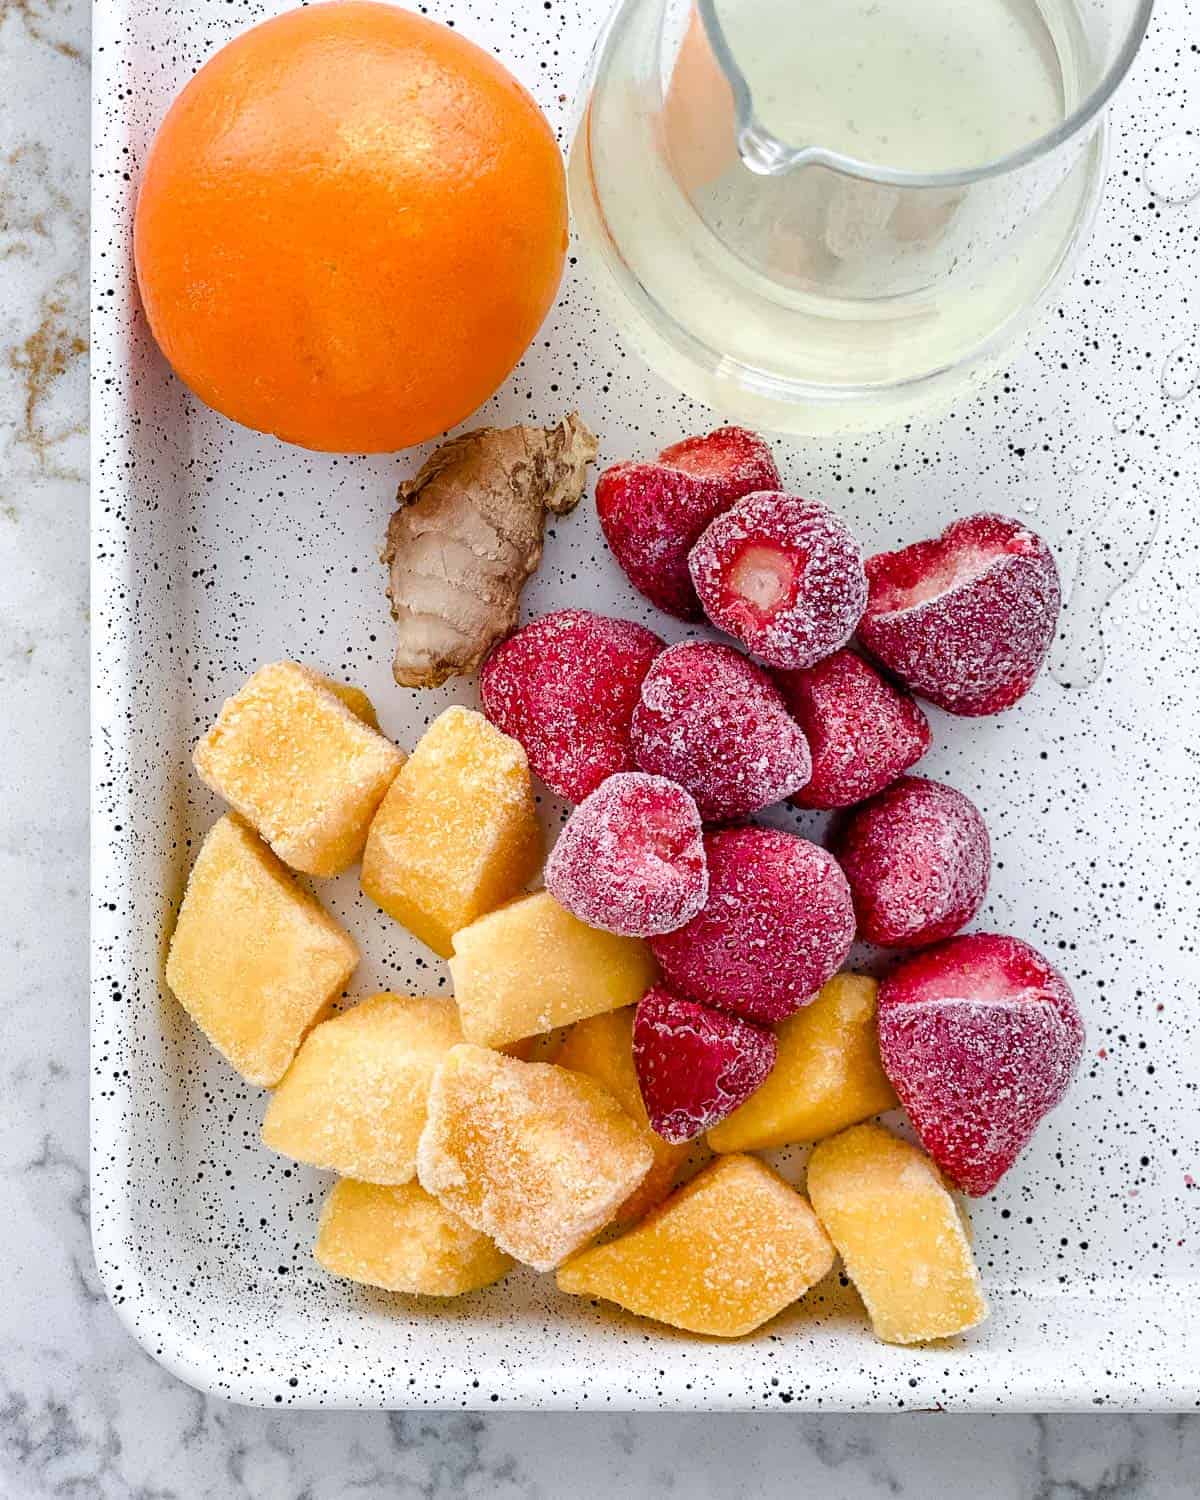 ingredients for ginger fruit smoothie on a white speckled tray